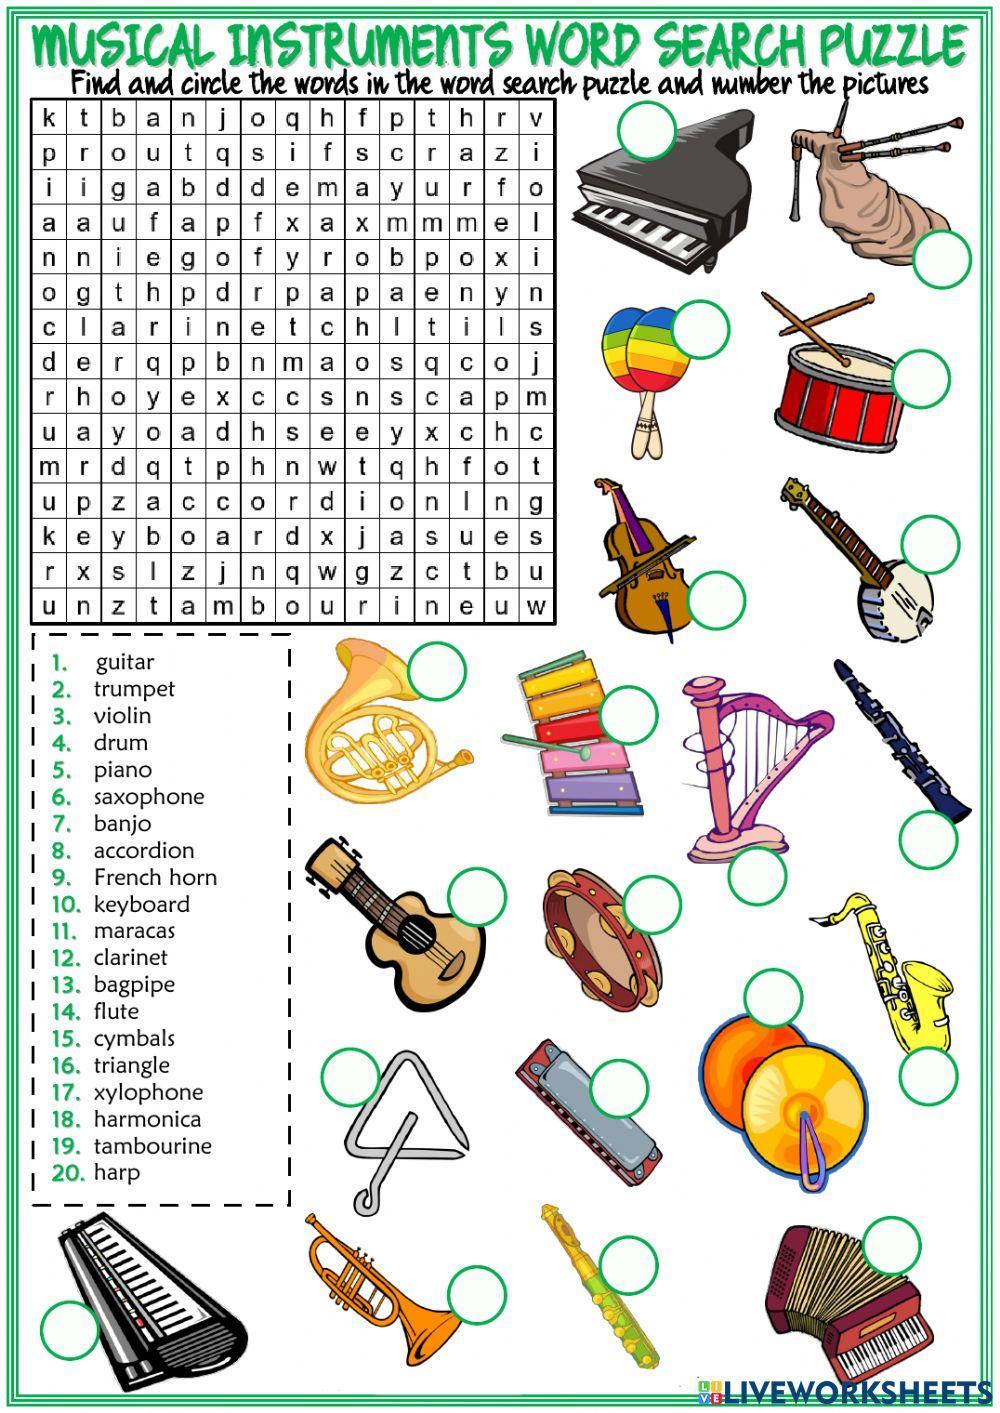 Word Search Puzzle (Musical Instruments)